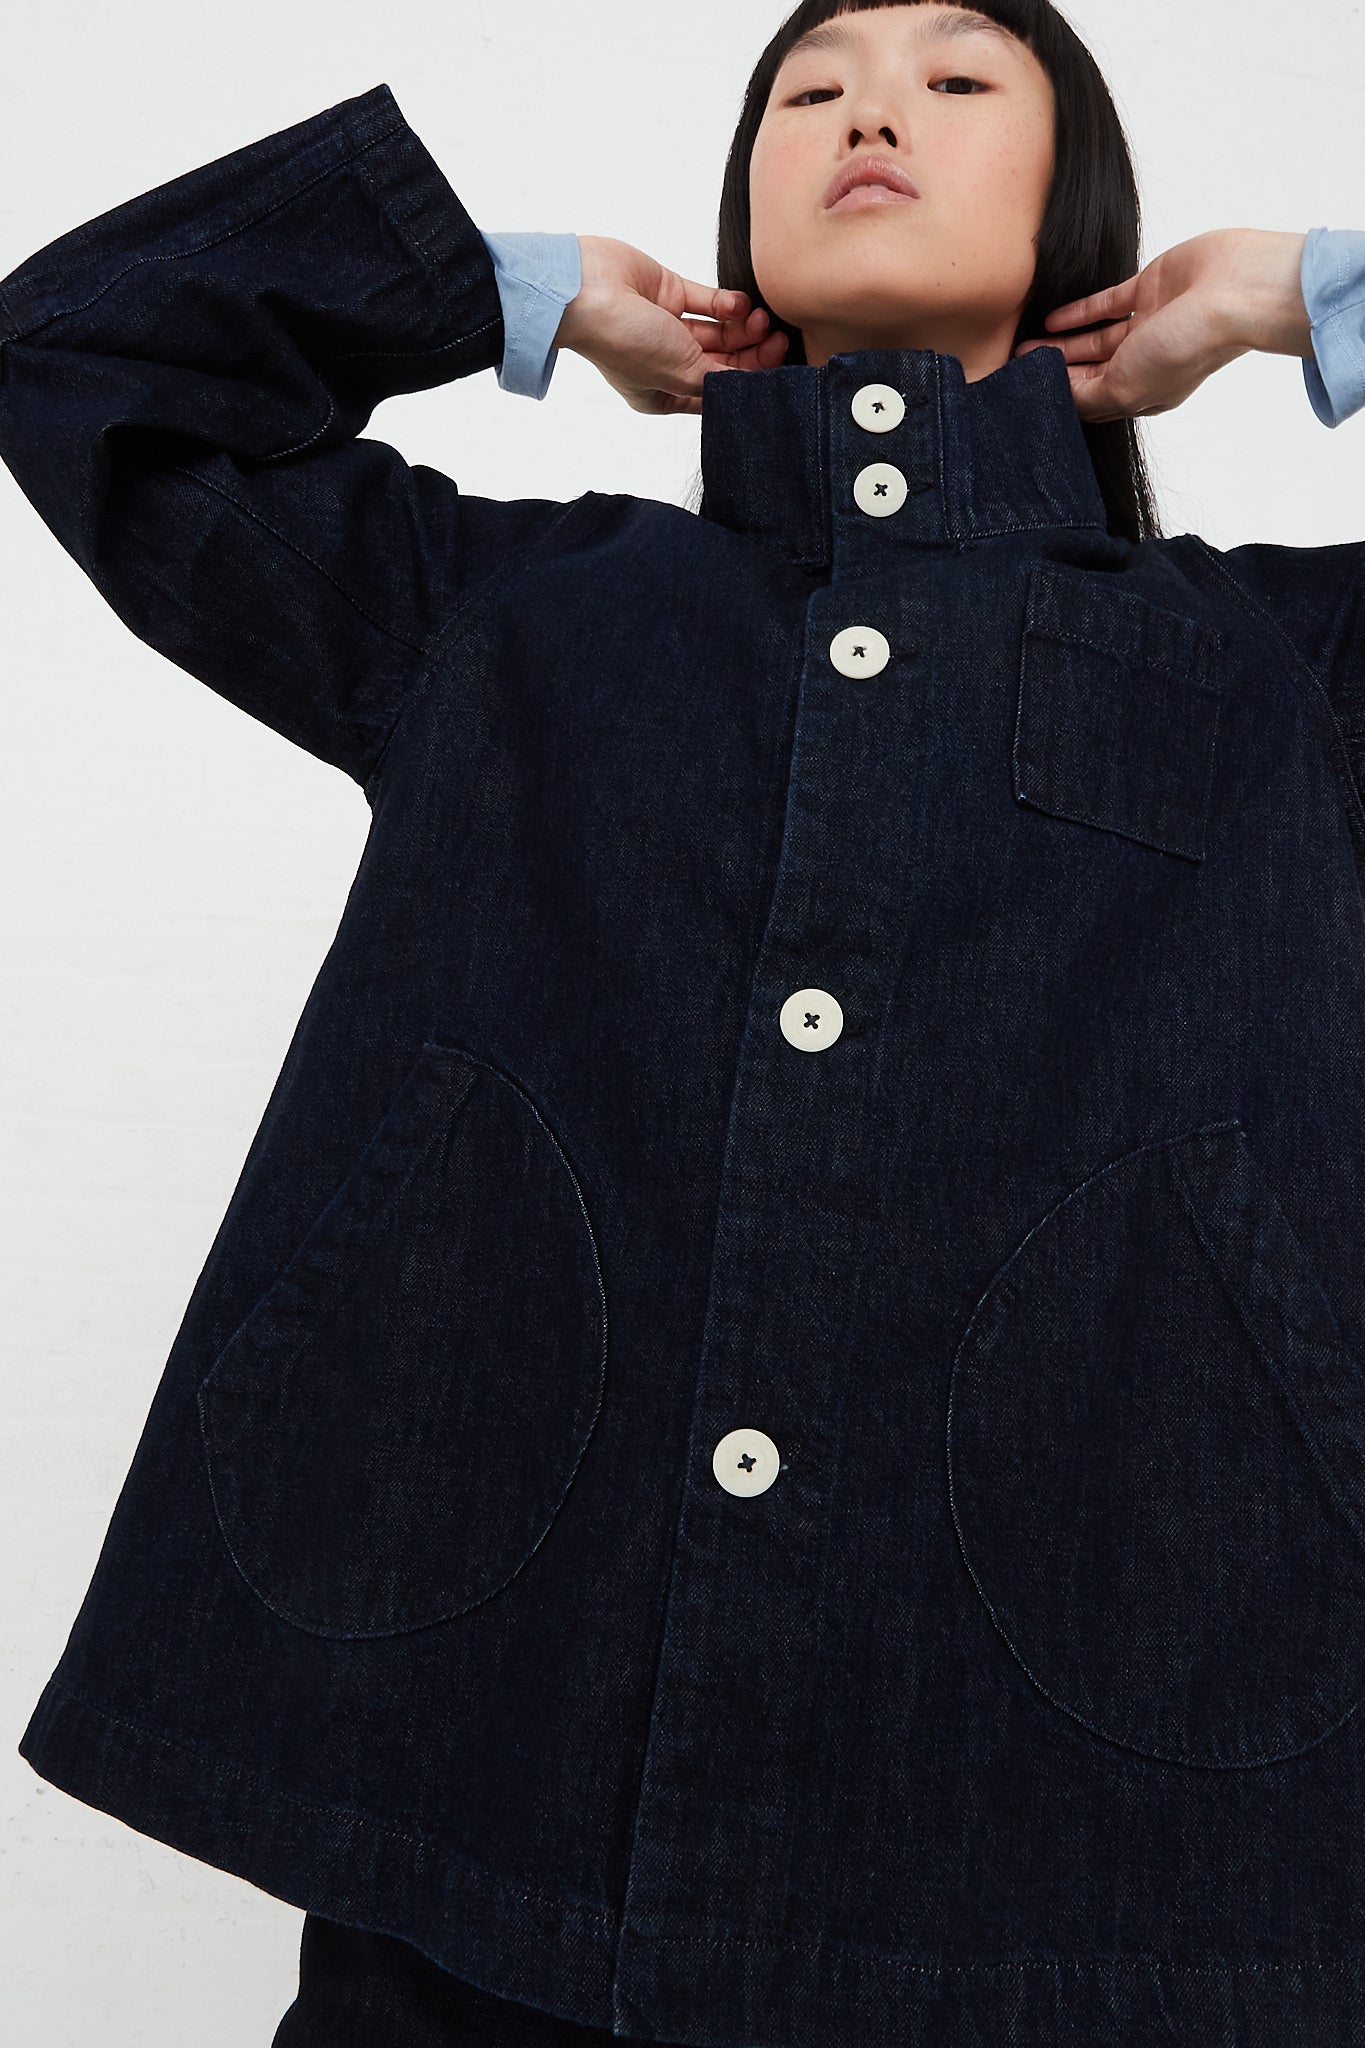 Deck Jacket in Japanese Denim by Jesse Kamm for Oroboro Front Closed